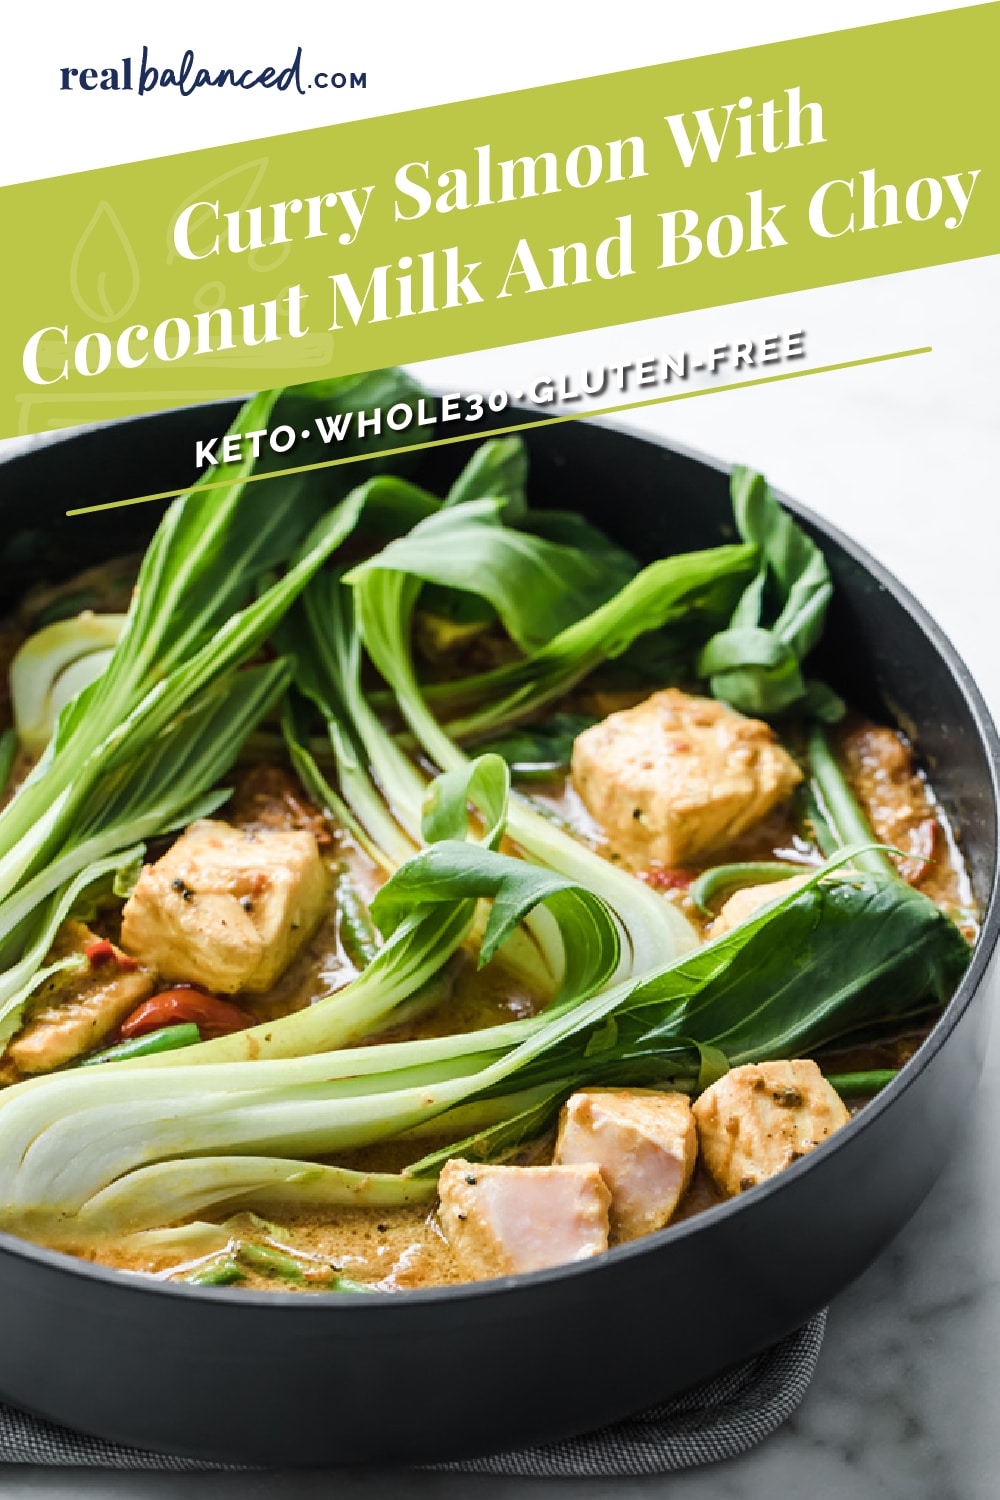 Curry Salmon With Coconut Milk And Bok Choy | Real Balanced